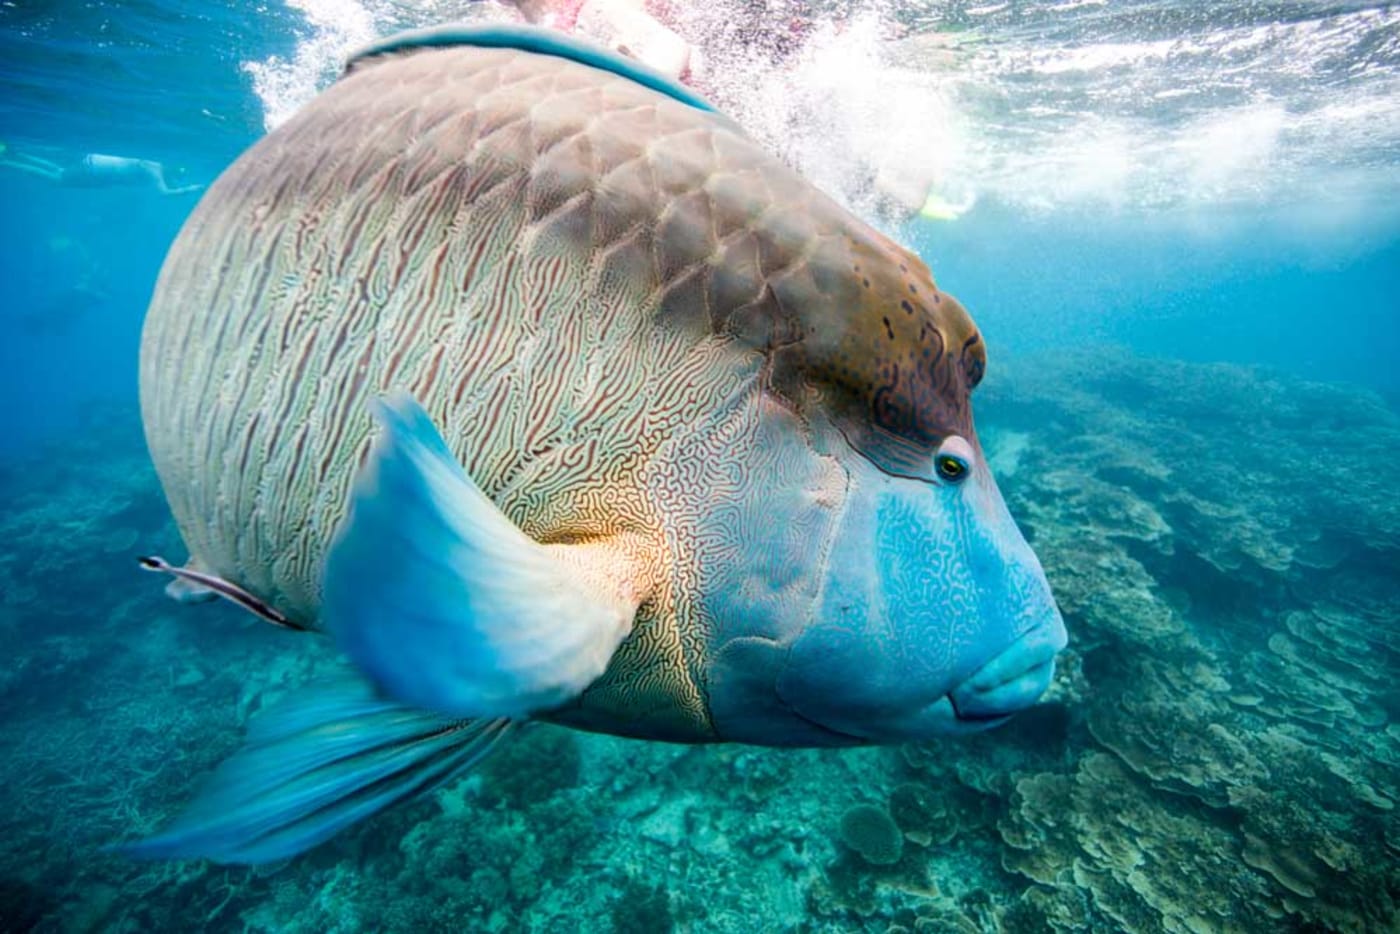 A humphead Maori wrasse (Cheilinus undulatus) on the Great Barrier Reef= Cairns